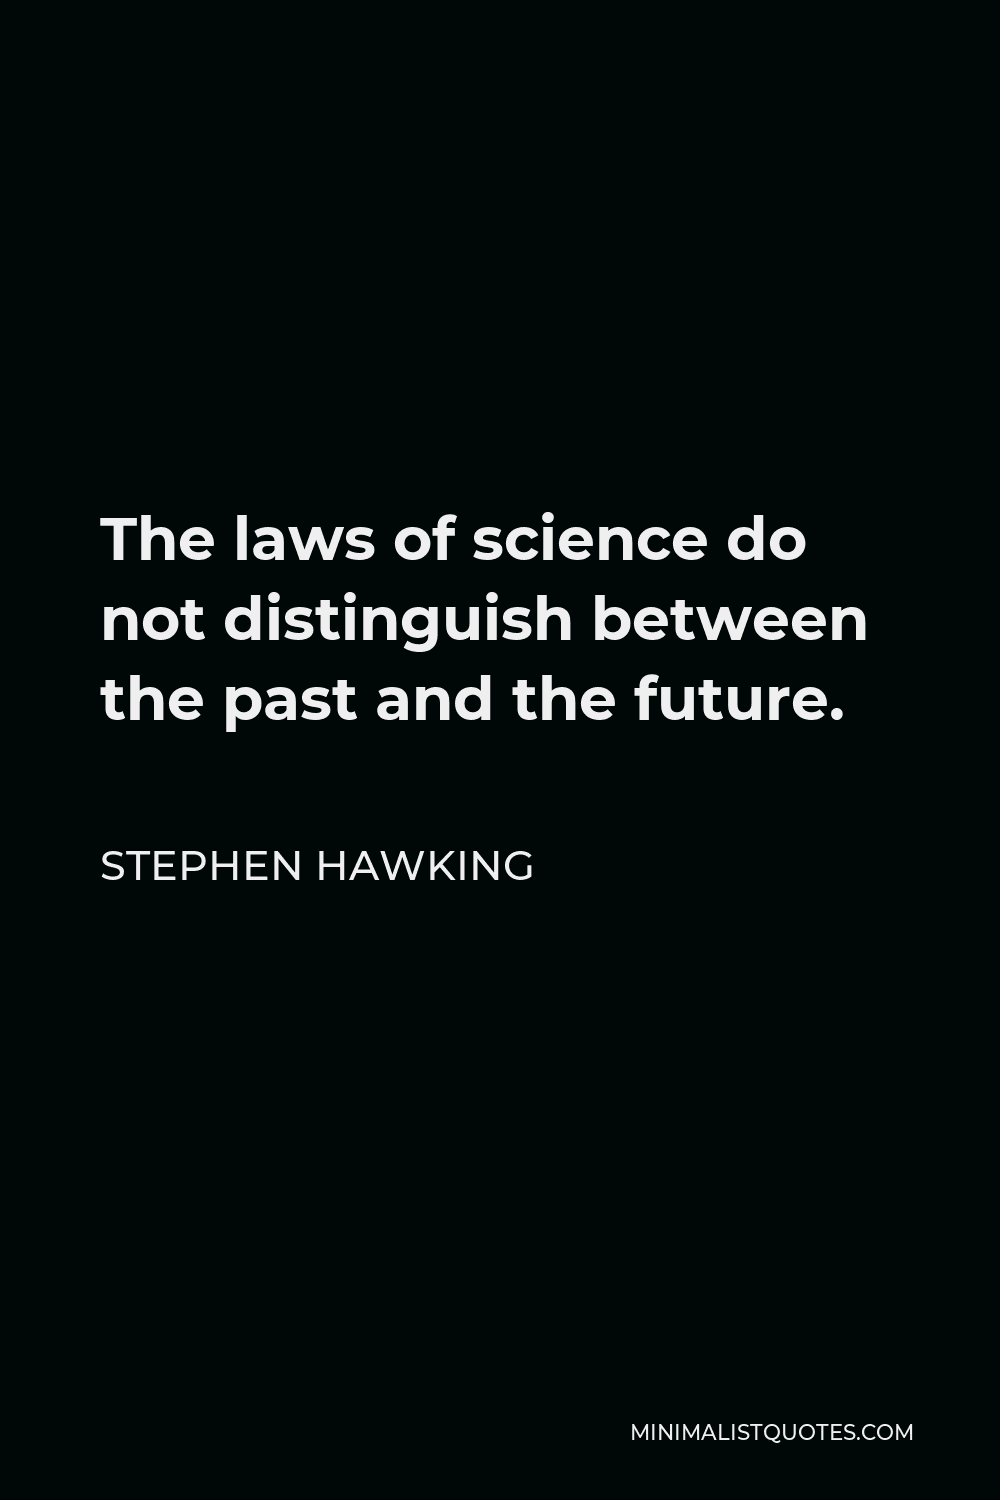 Stephen Hawking Quote - The laws of science do not distinguish between the past and the future.